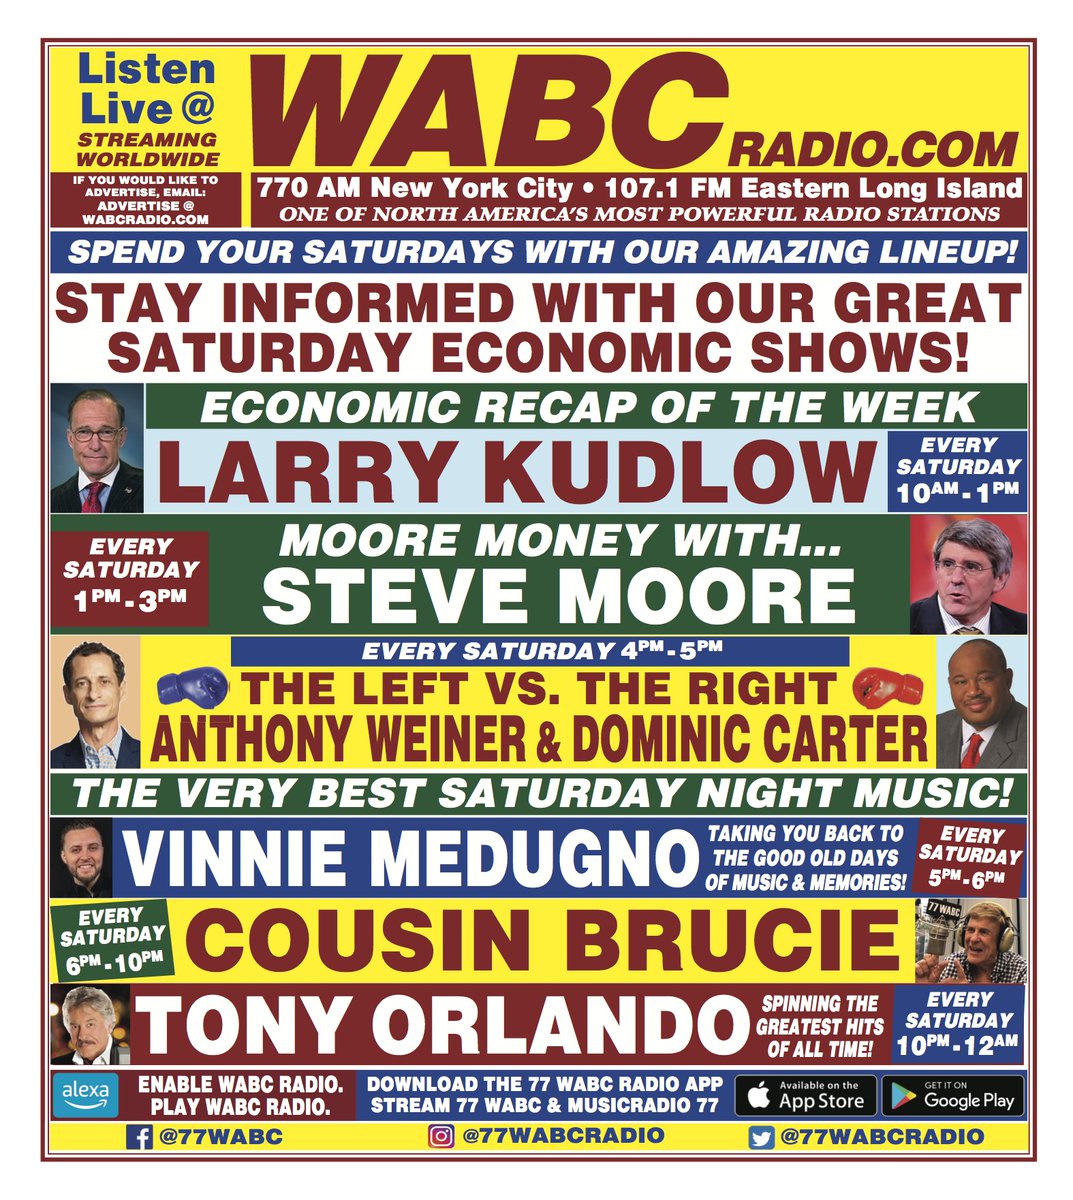 Stay informed with our great Saturday Economic Shows! @larry_kudlow, @StephenMoore, @DominicTV vs. @repweiner. And SATURDAY NIGHT MUSIC with @VinnieMedugno, Cousin Brucie, @TonyOrlando and more! LISTEN ON WABCRADIO.COM OR ON THE #77WABC RADIO APP!